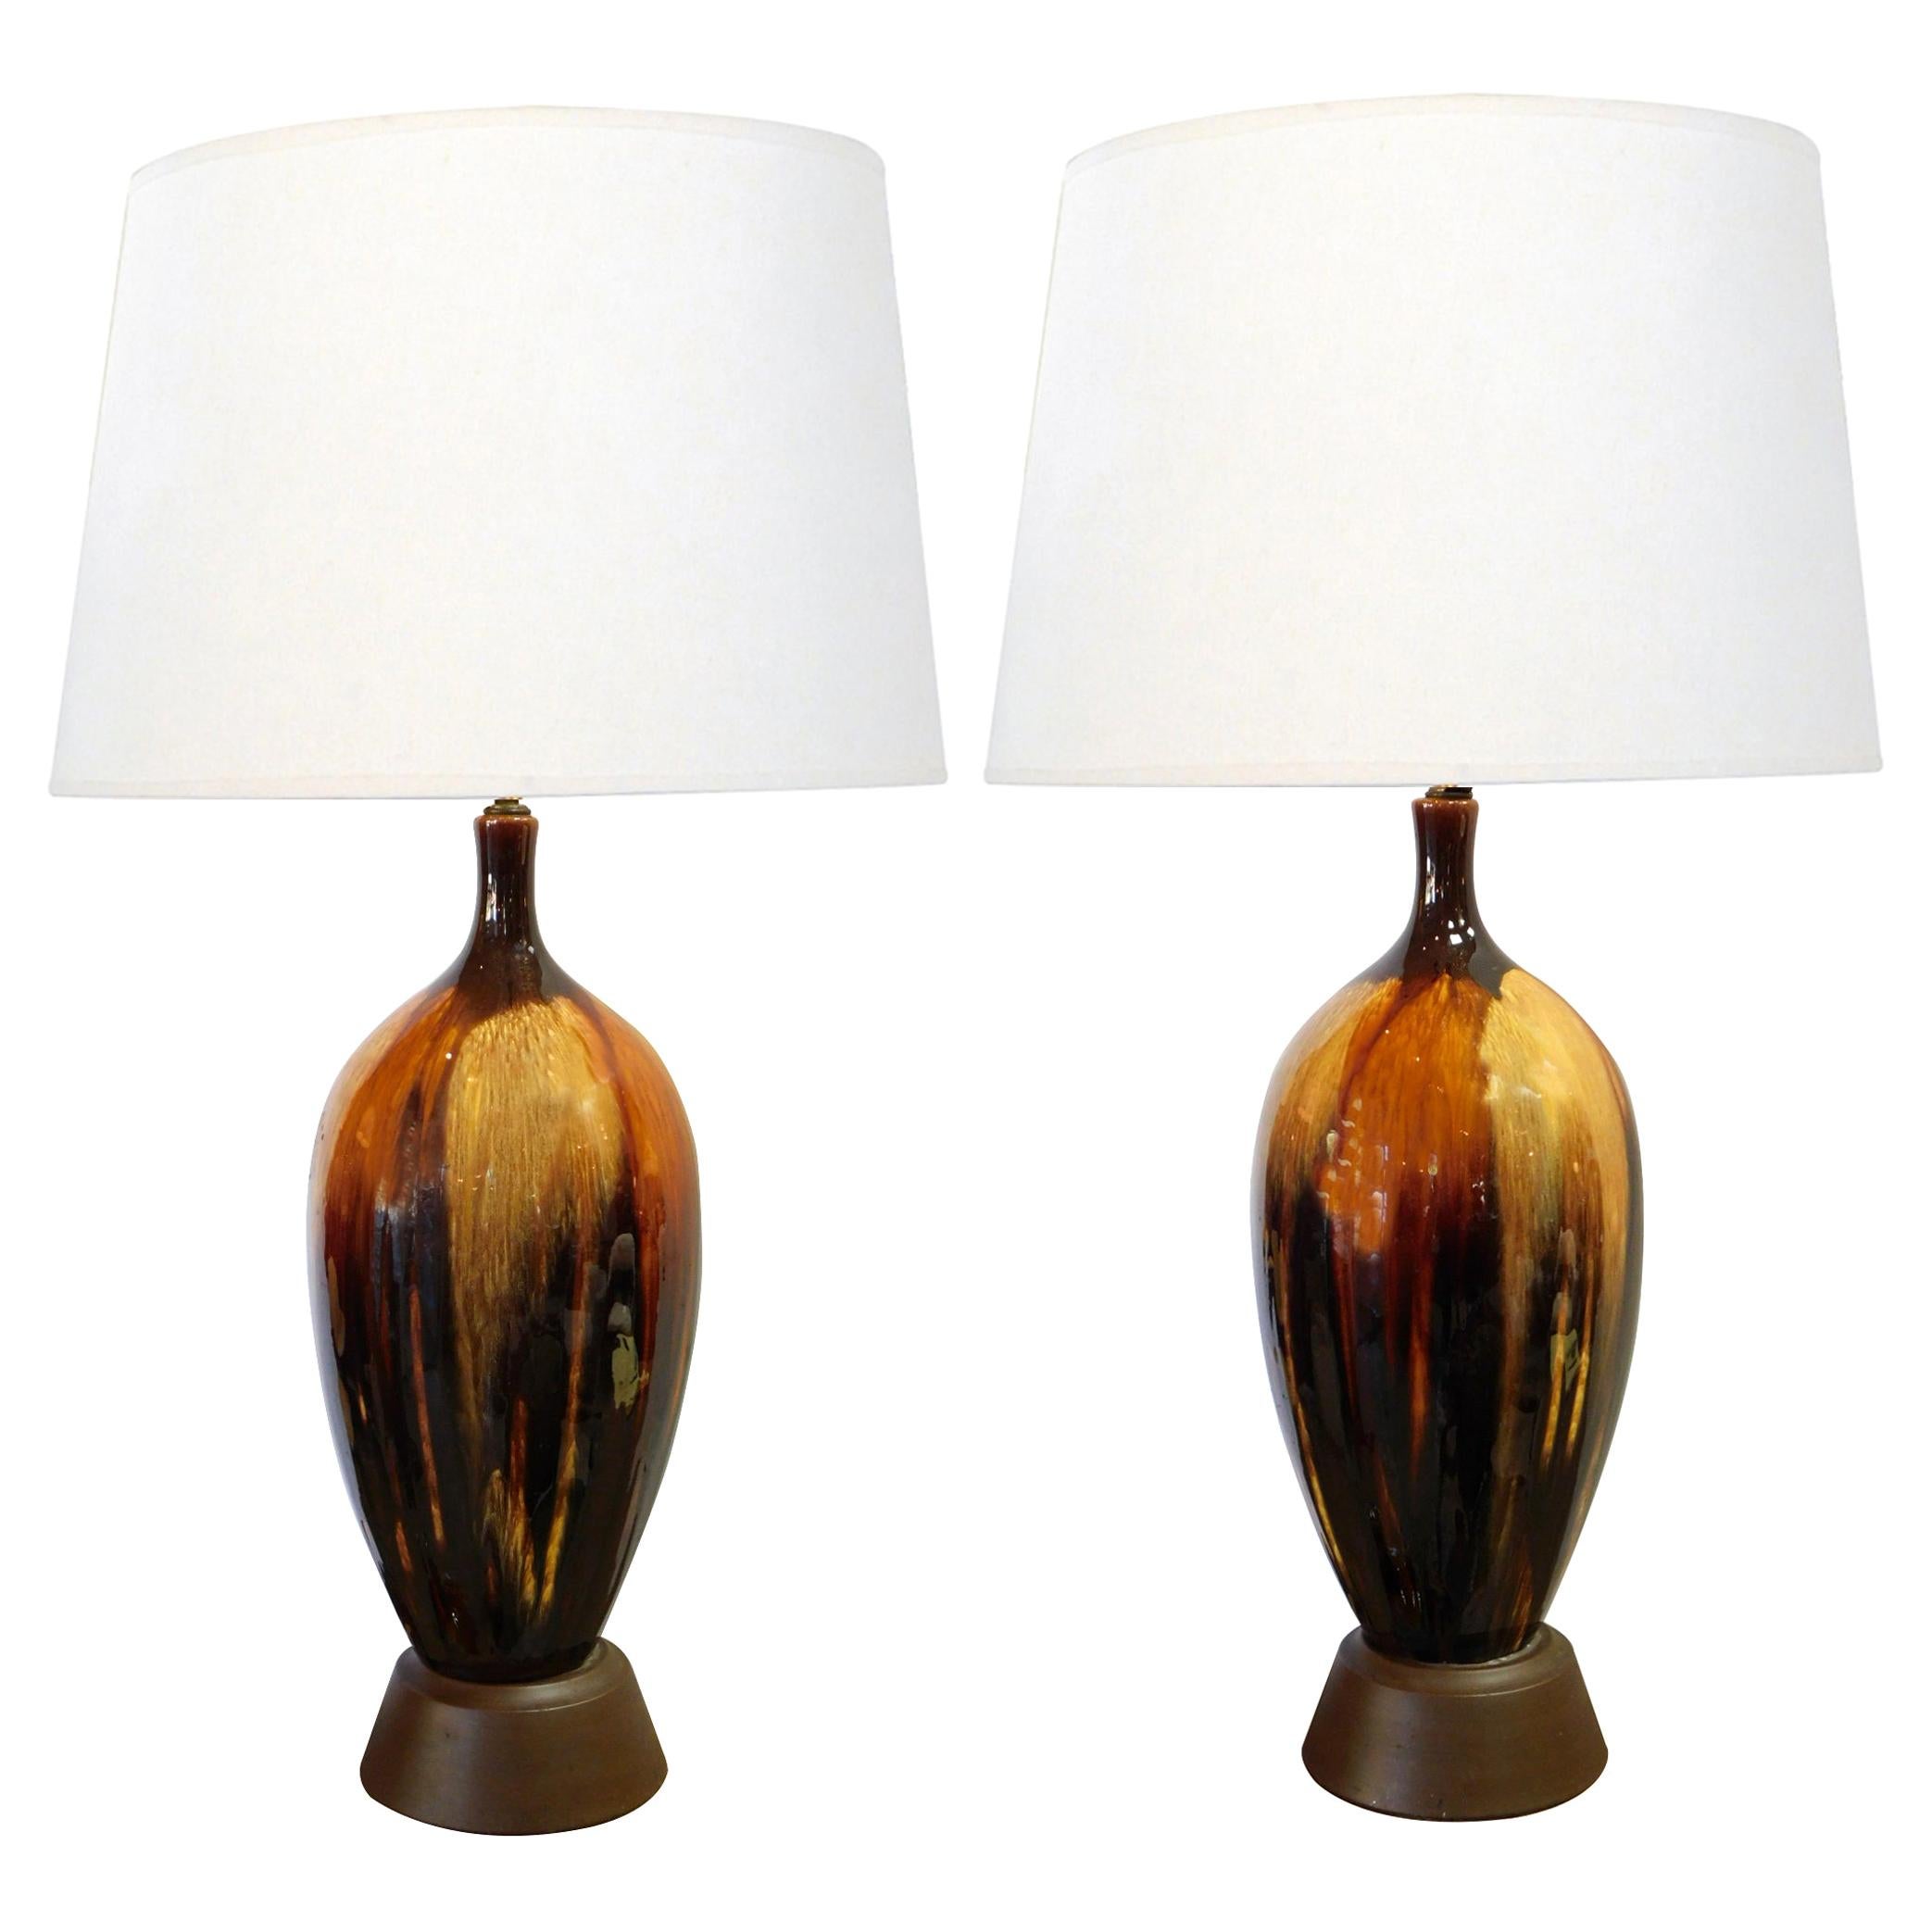 Tall and Richly-Colored American 1960s Ovoid-Form Drip-Glaze Lamps